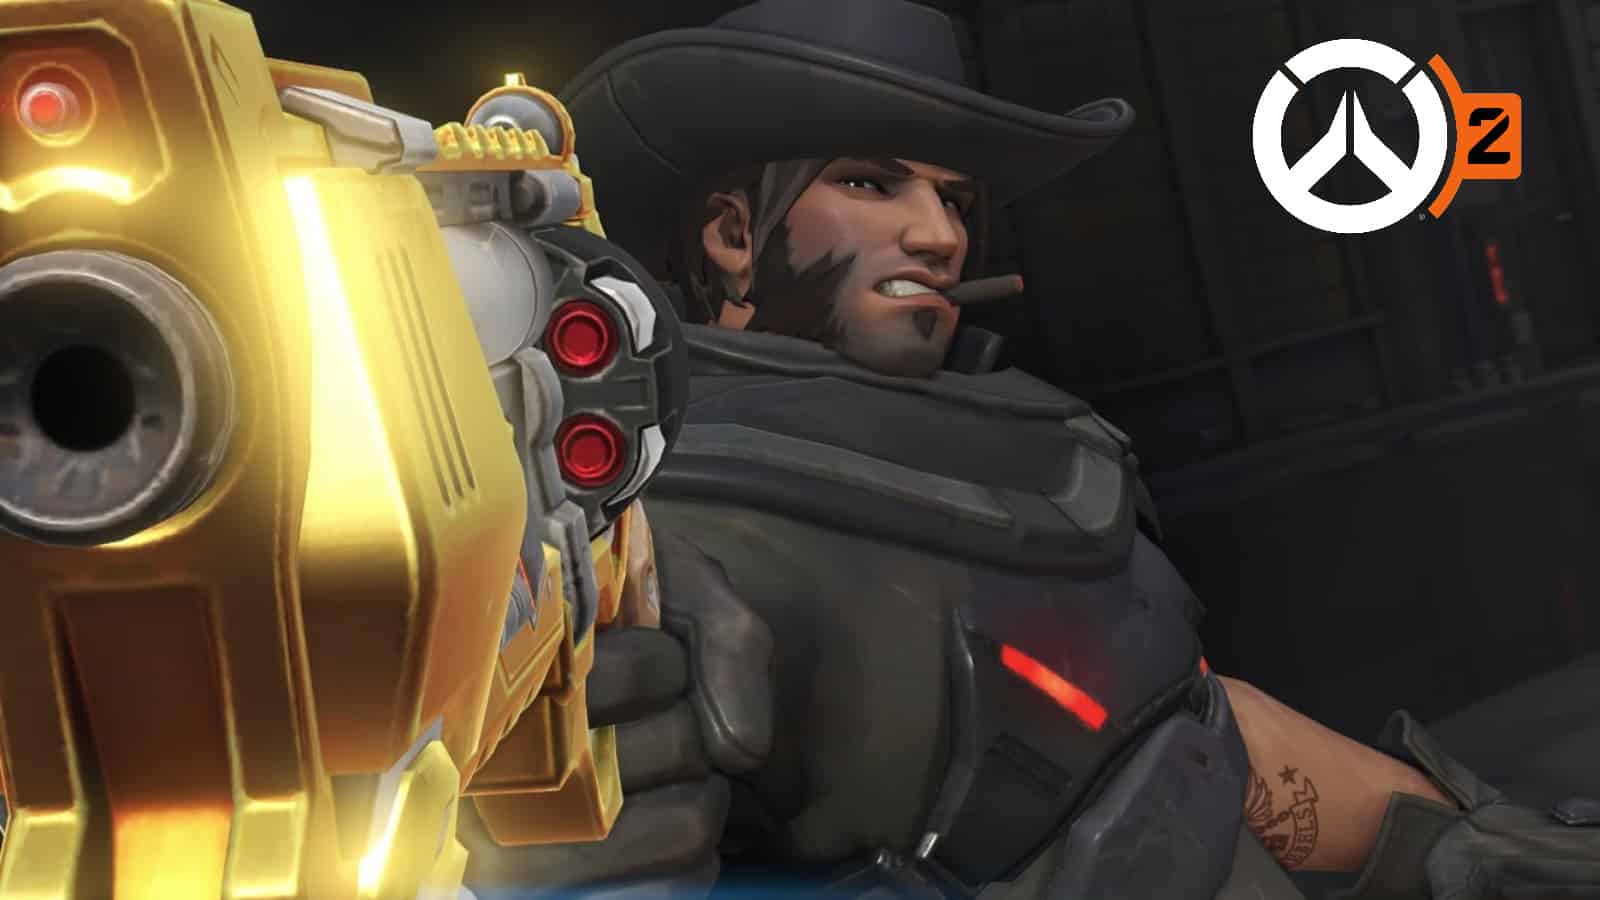 cassidy mccree with ow2 golden gun